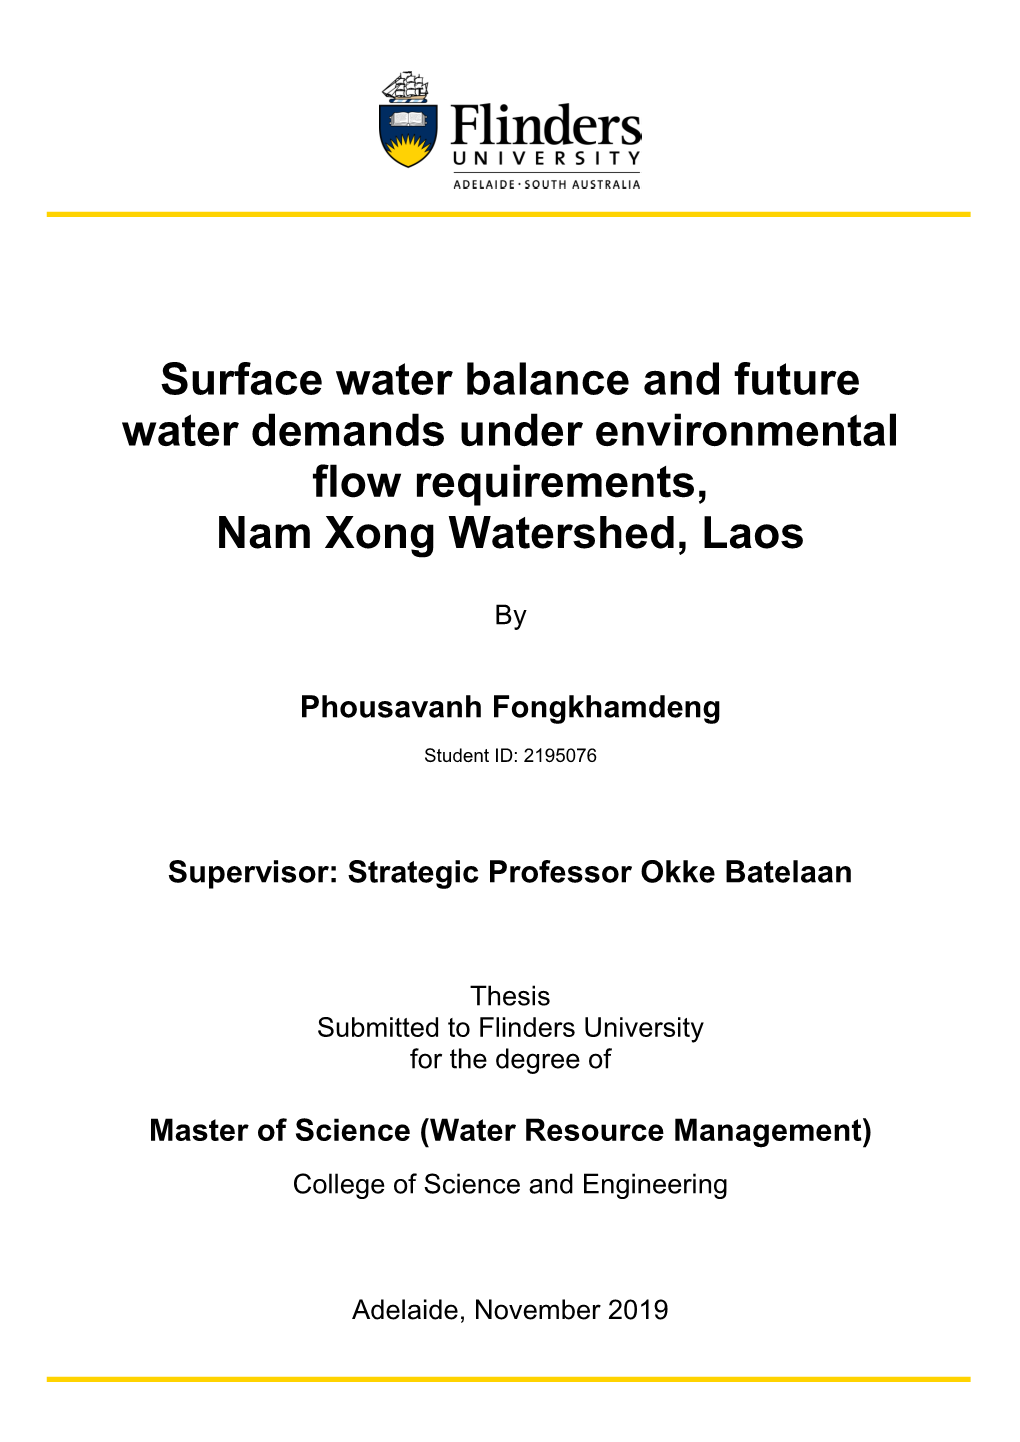 Surface Water Balance and Future Water Demands Under Environmental Flow Requirements, Nam Xong Watershed, Laos